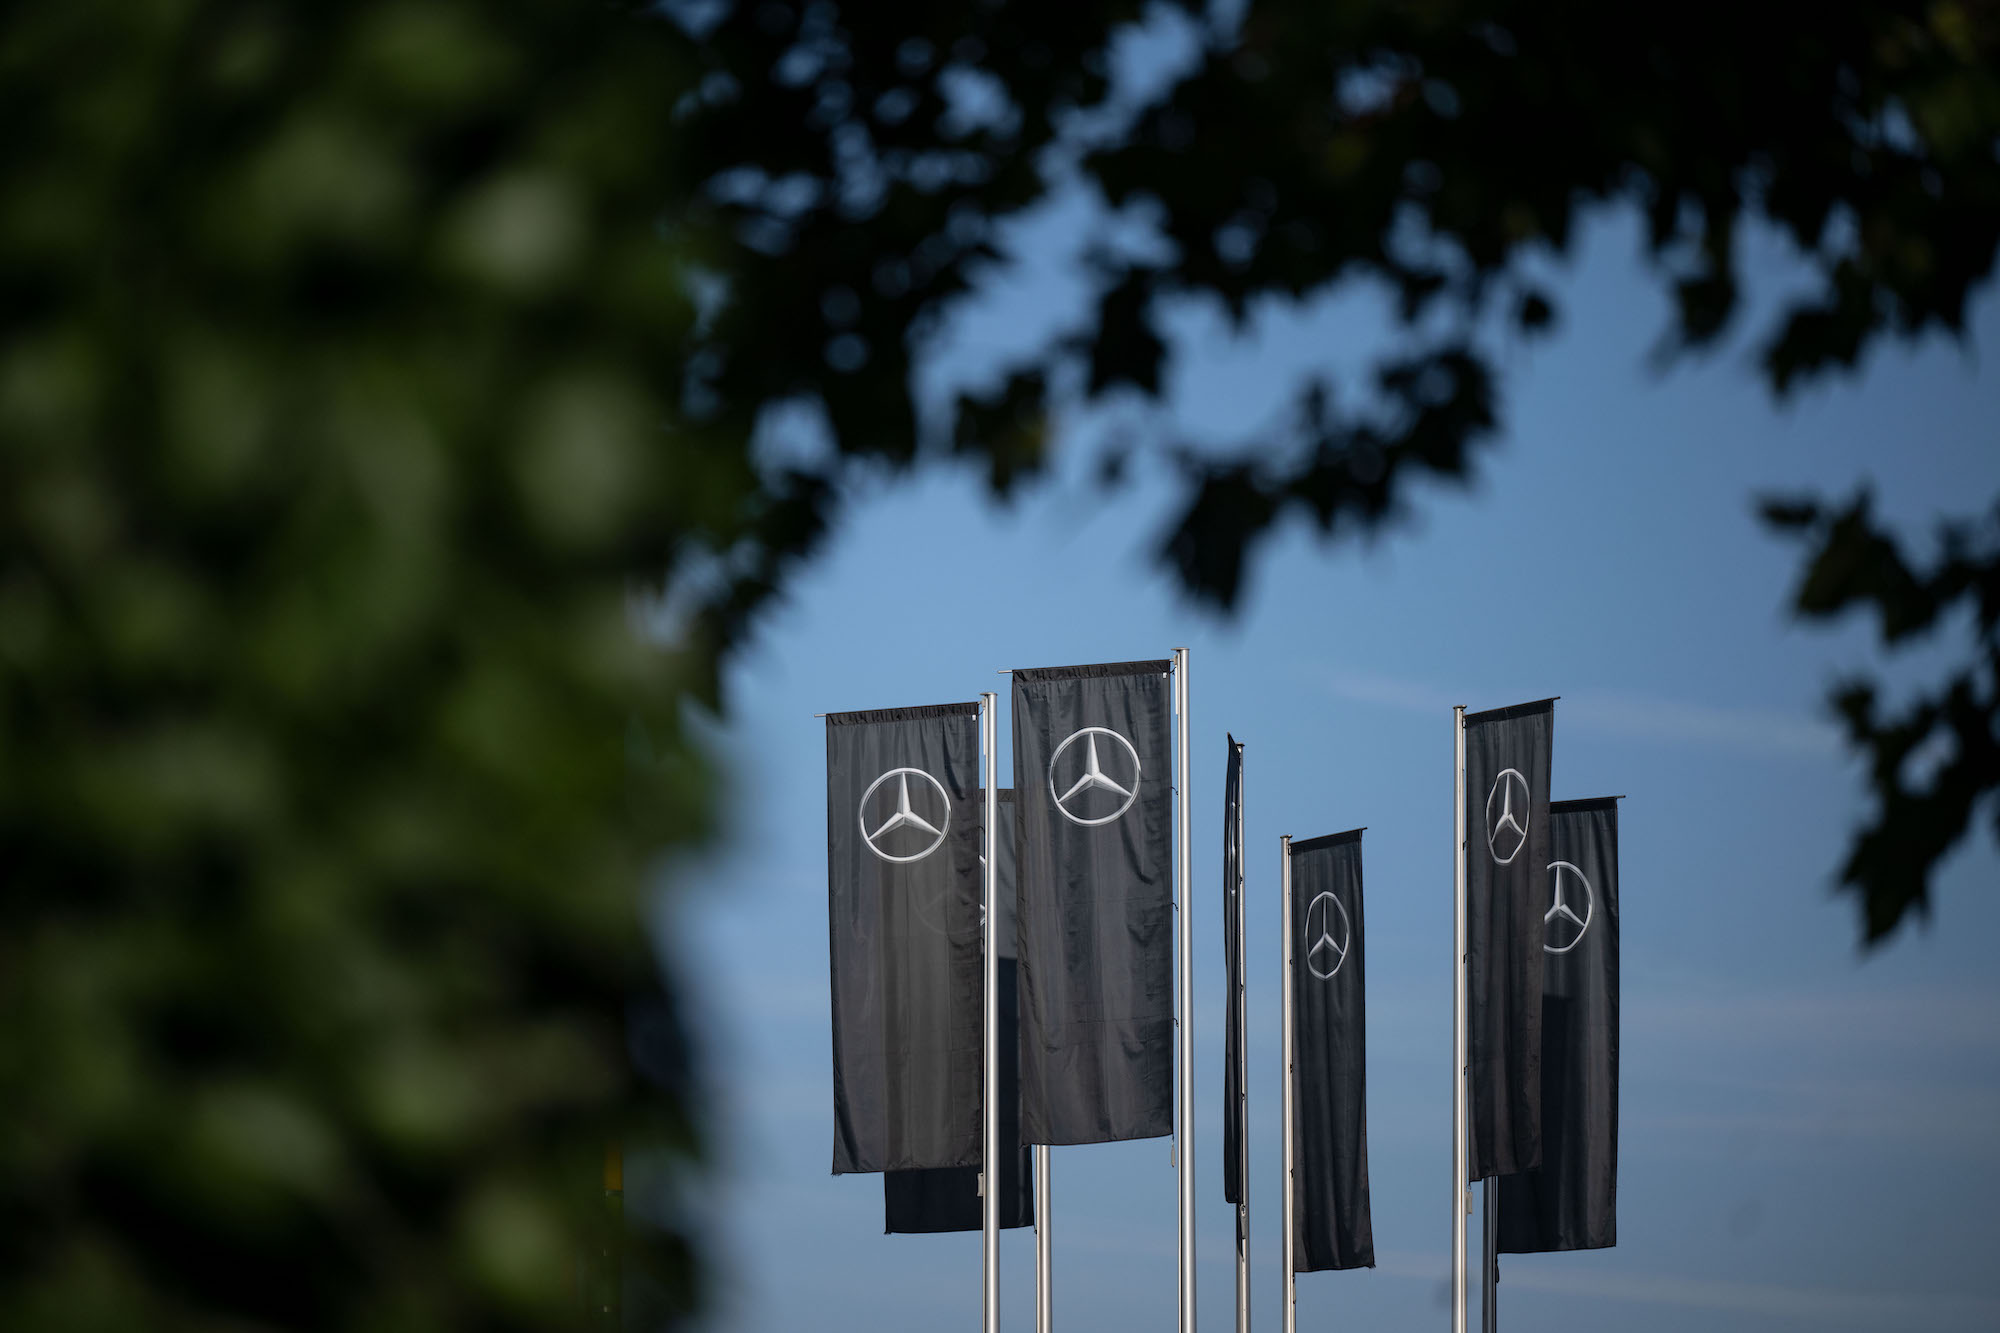 Mercedes-Benz flags, which will have the most autonomous vehicle on the market.